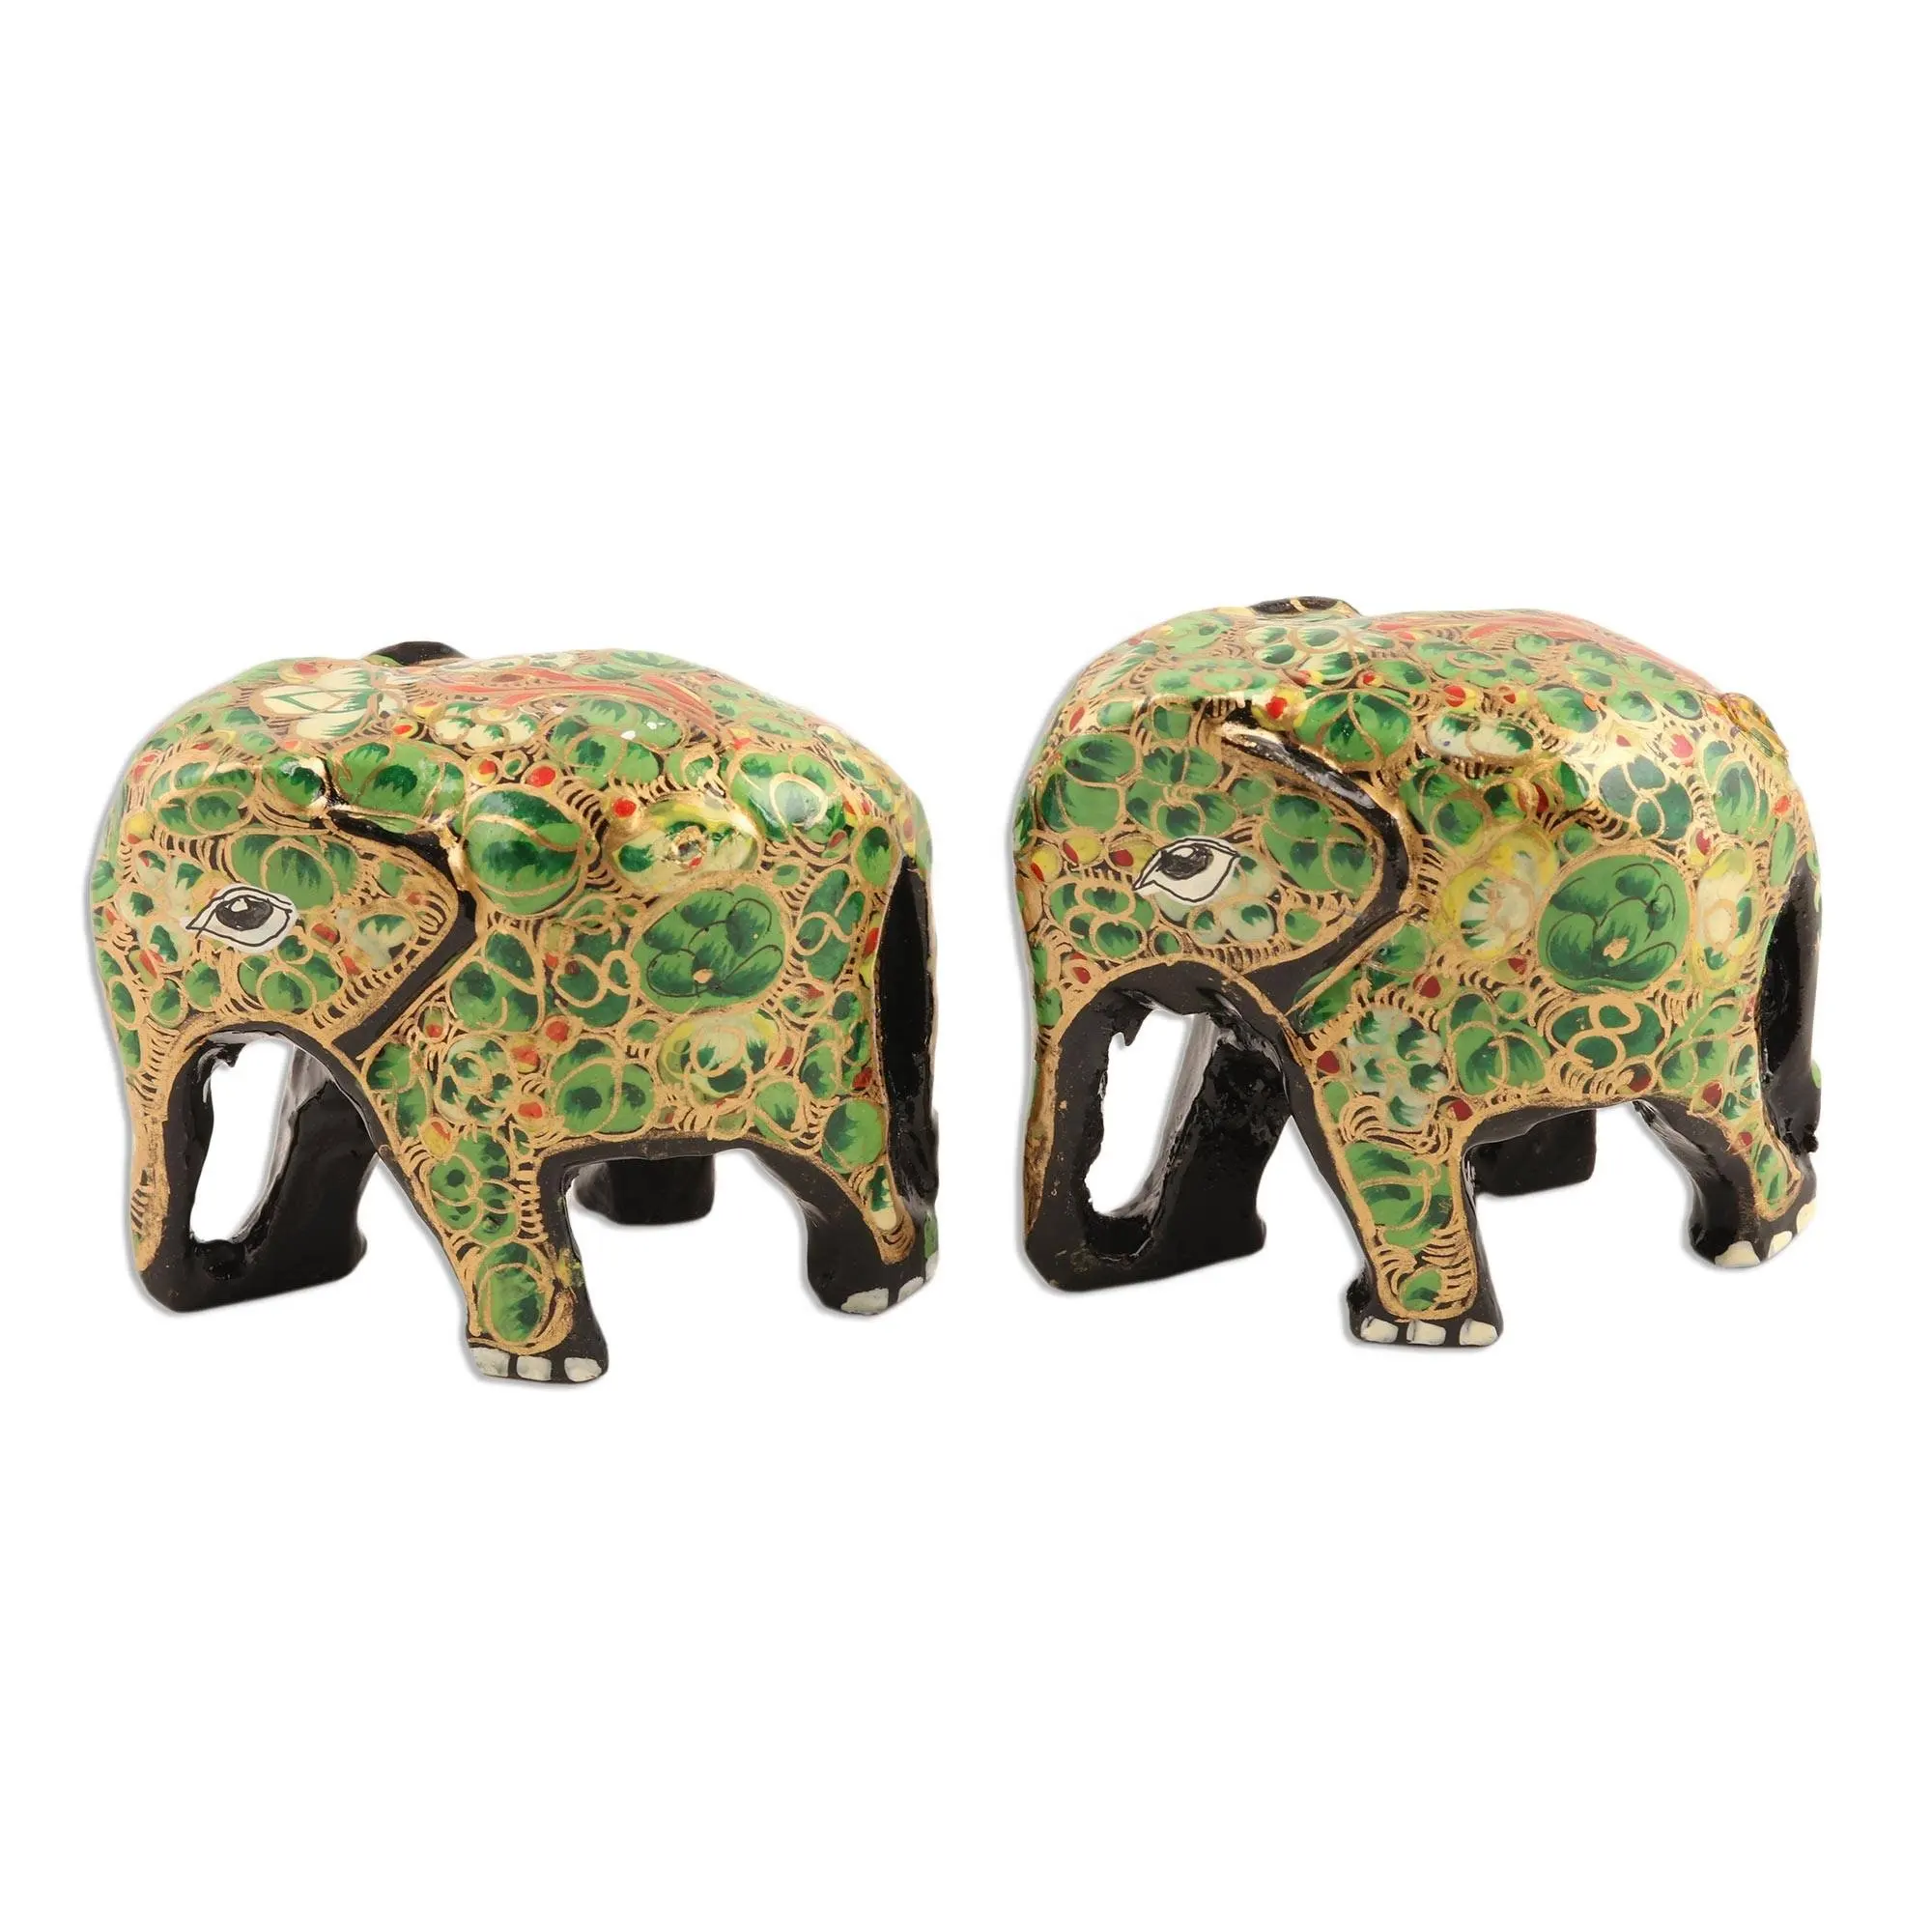 Miniature elephant ornaments hand painted wooden elephant statues from Kashmir India